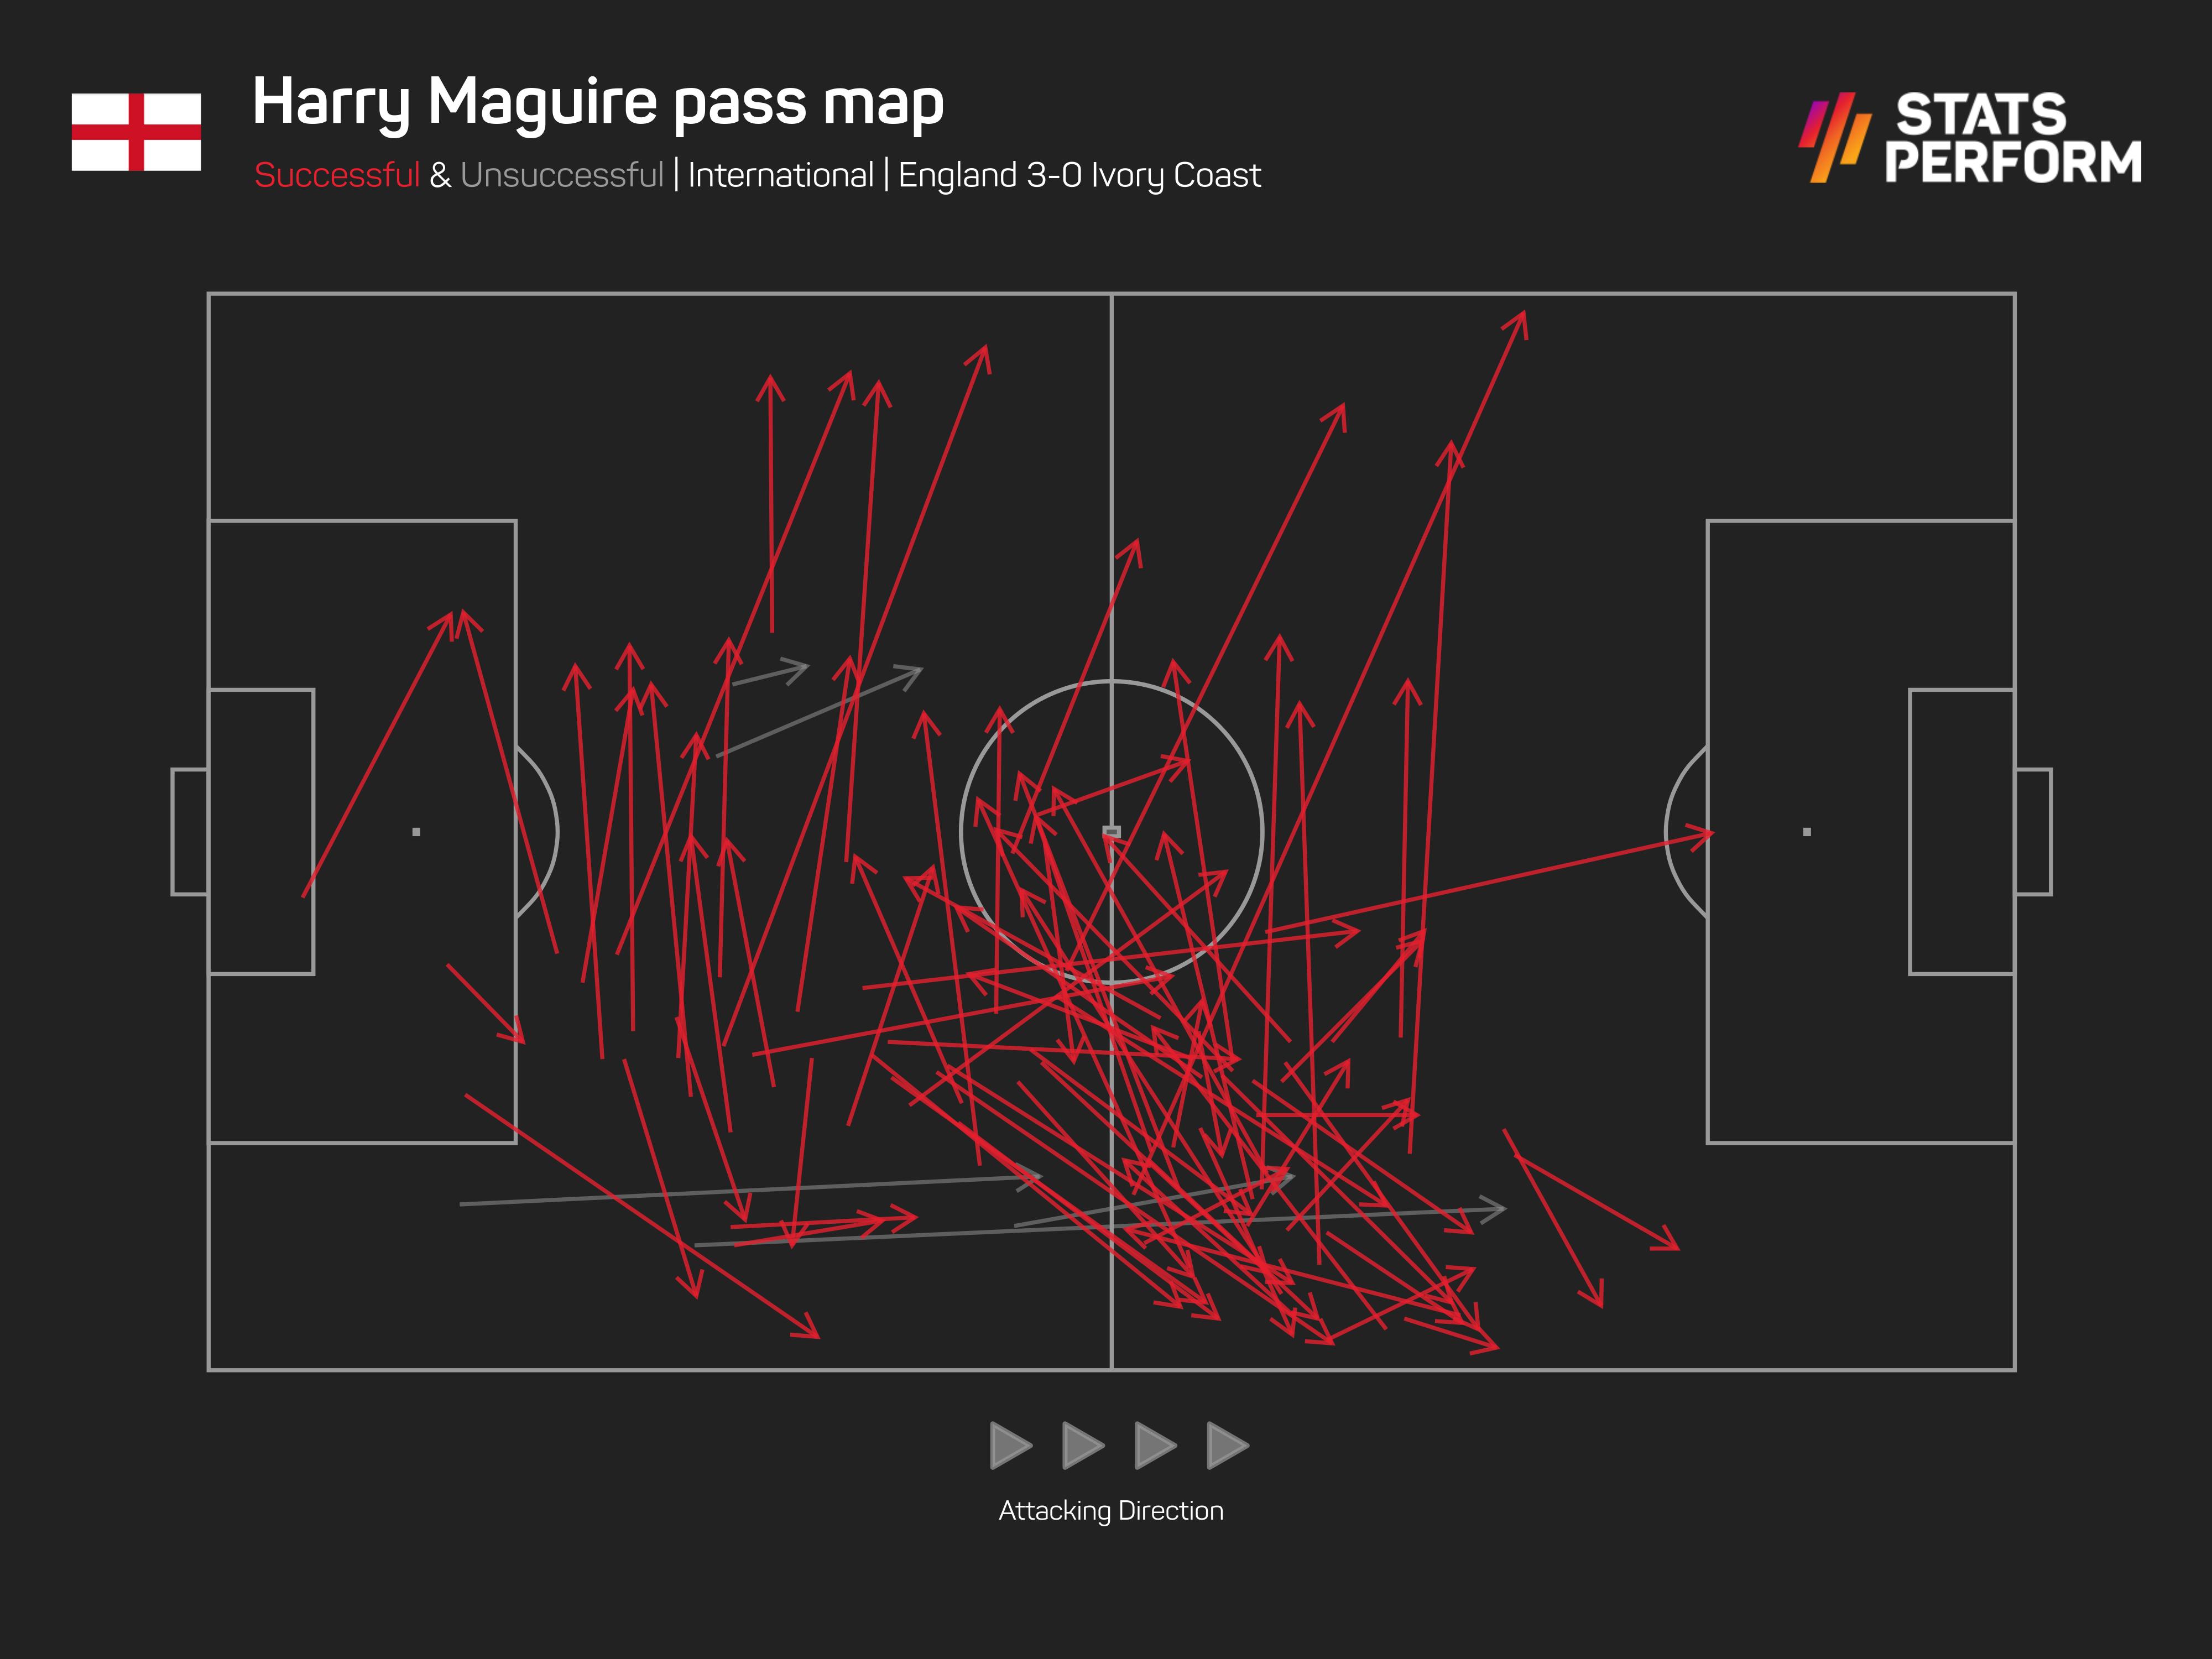 Harry Maguire pass map